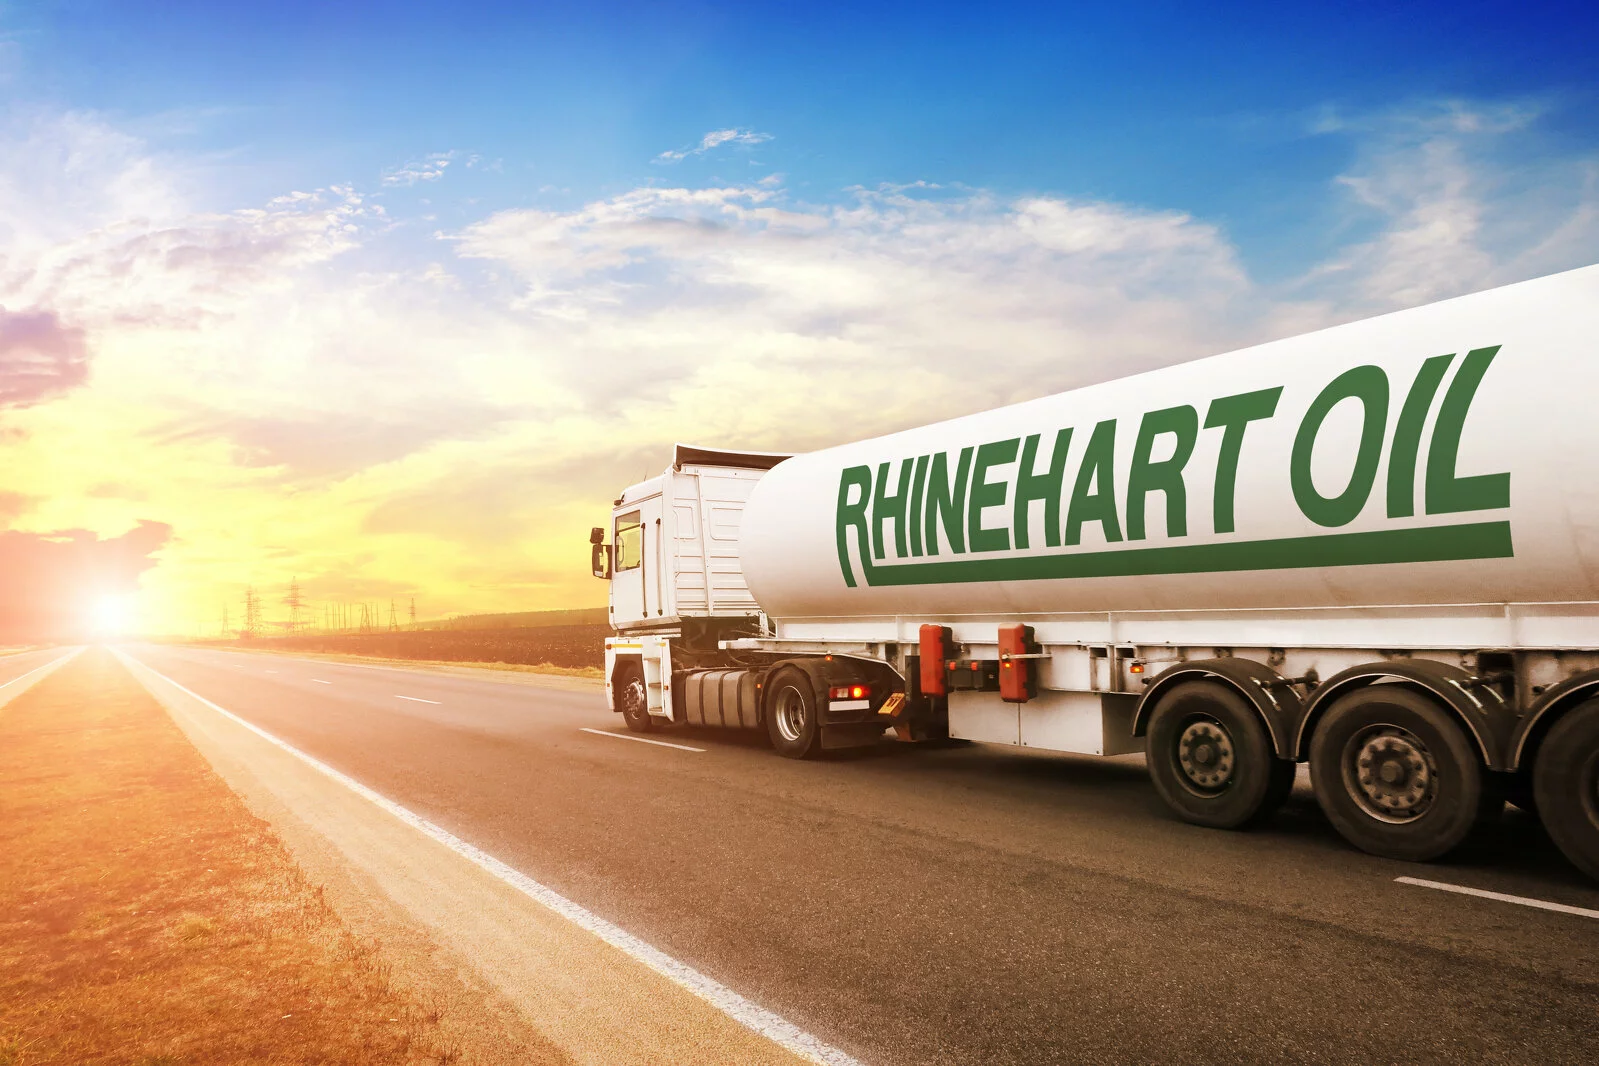 Big metal fuel tanker truck shipping fuel on the countryside road against a night sky with a sunset 2022/03/Rhinehart-Oil-Truck-2.jpg 